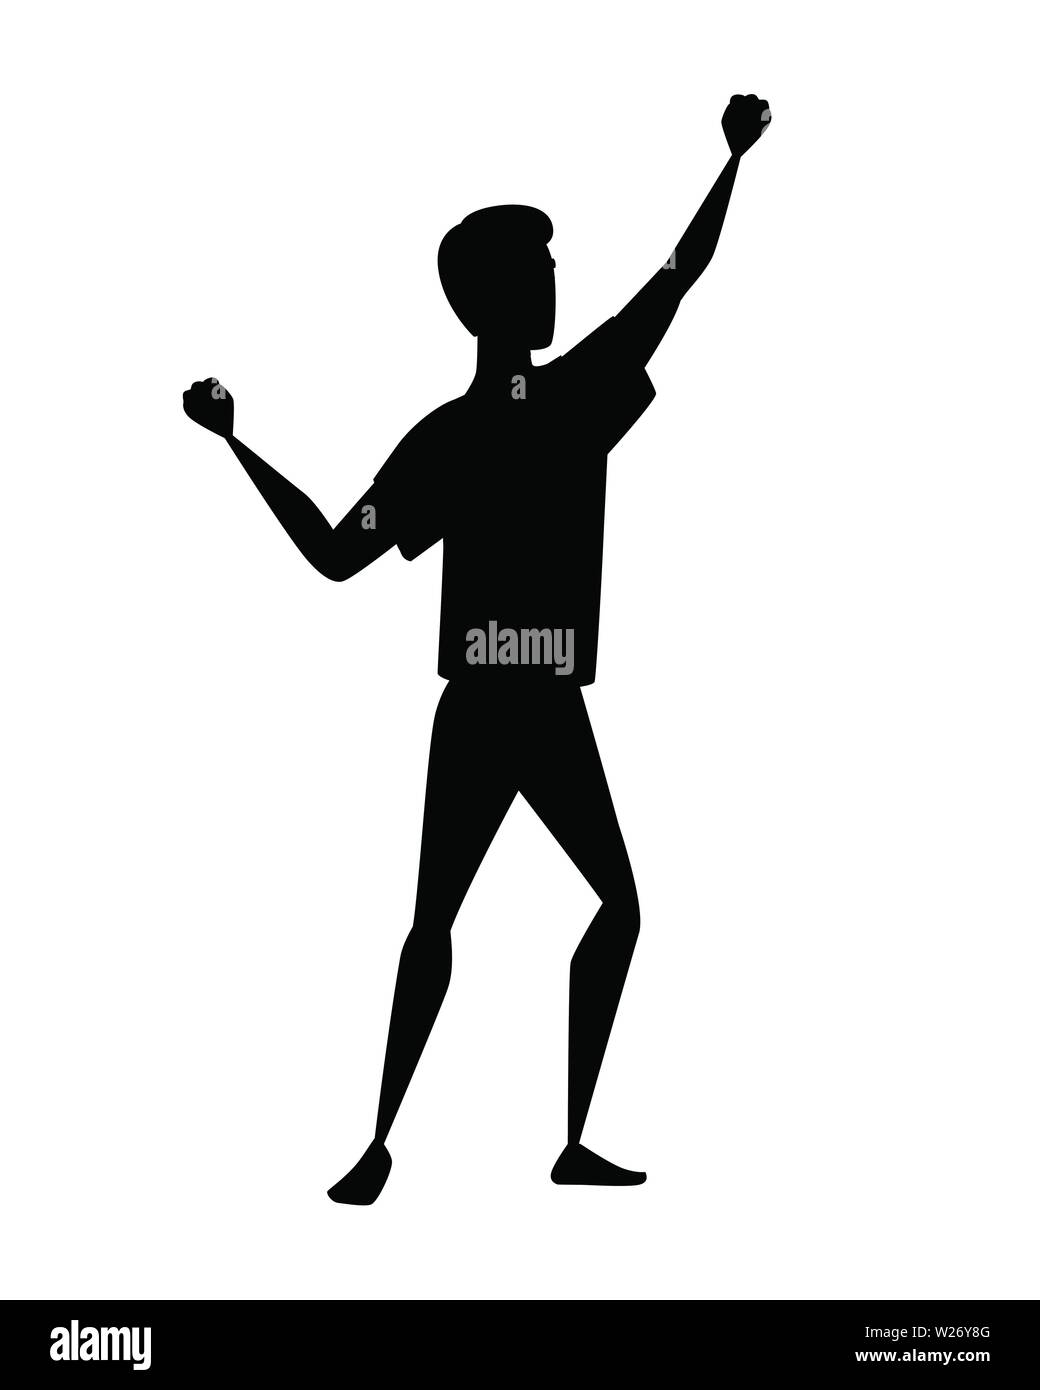 Black silhouette man wearing sports suit with upraised hand cartoon character design flat vector illustration isolated on white background. Stock Vector